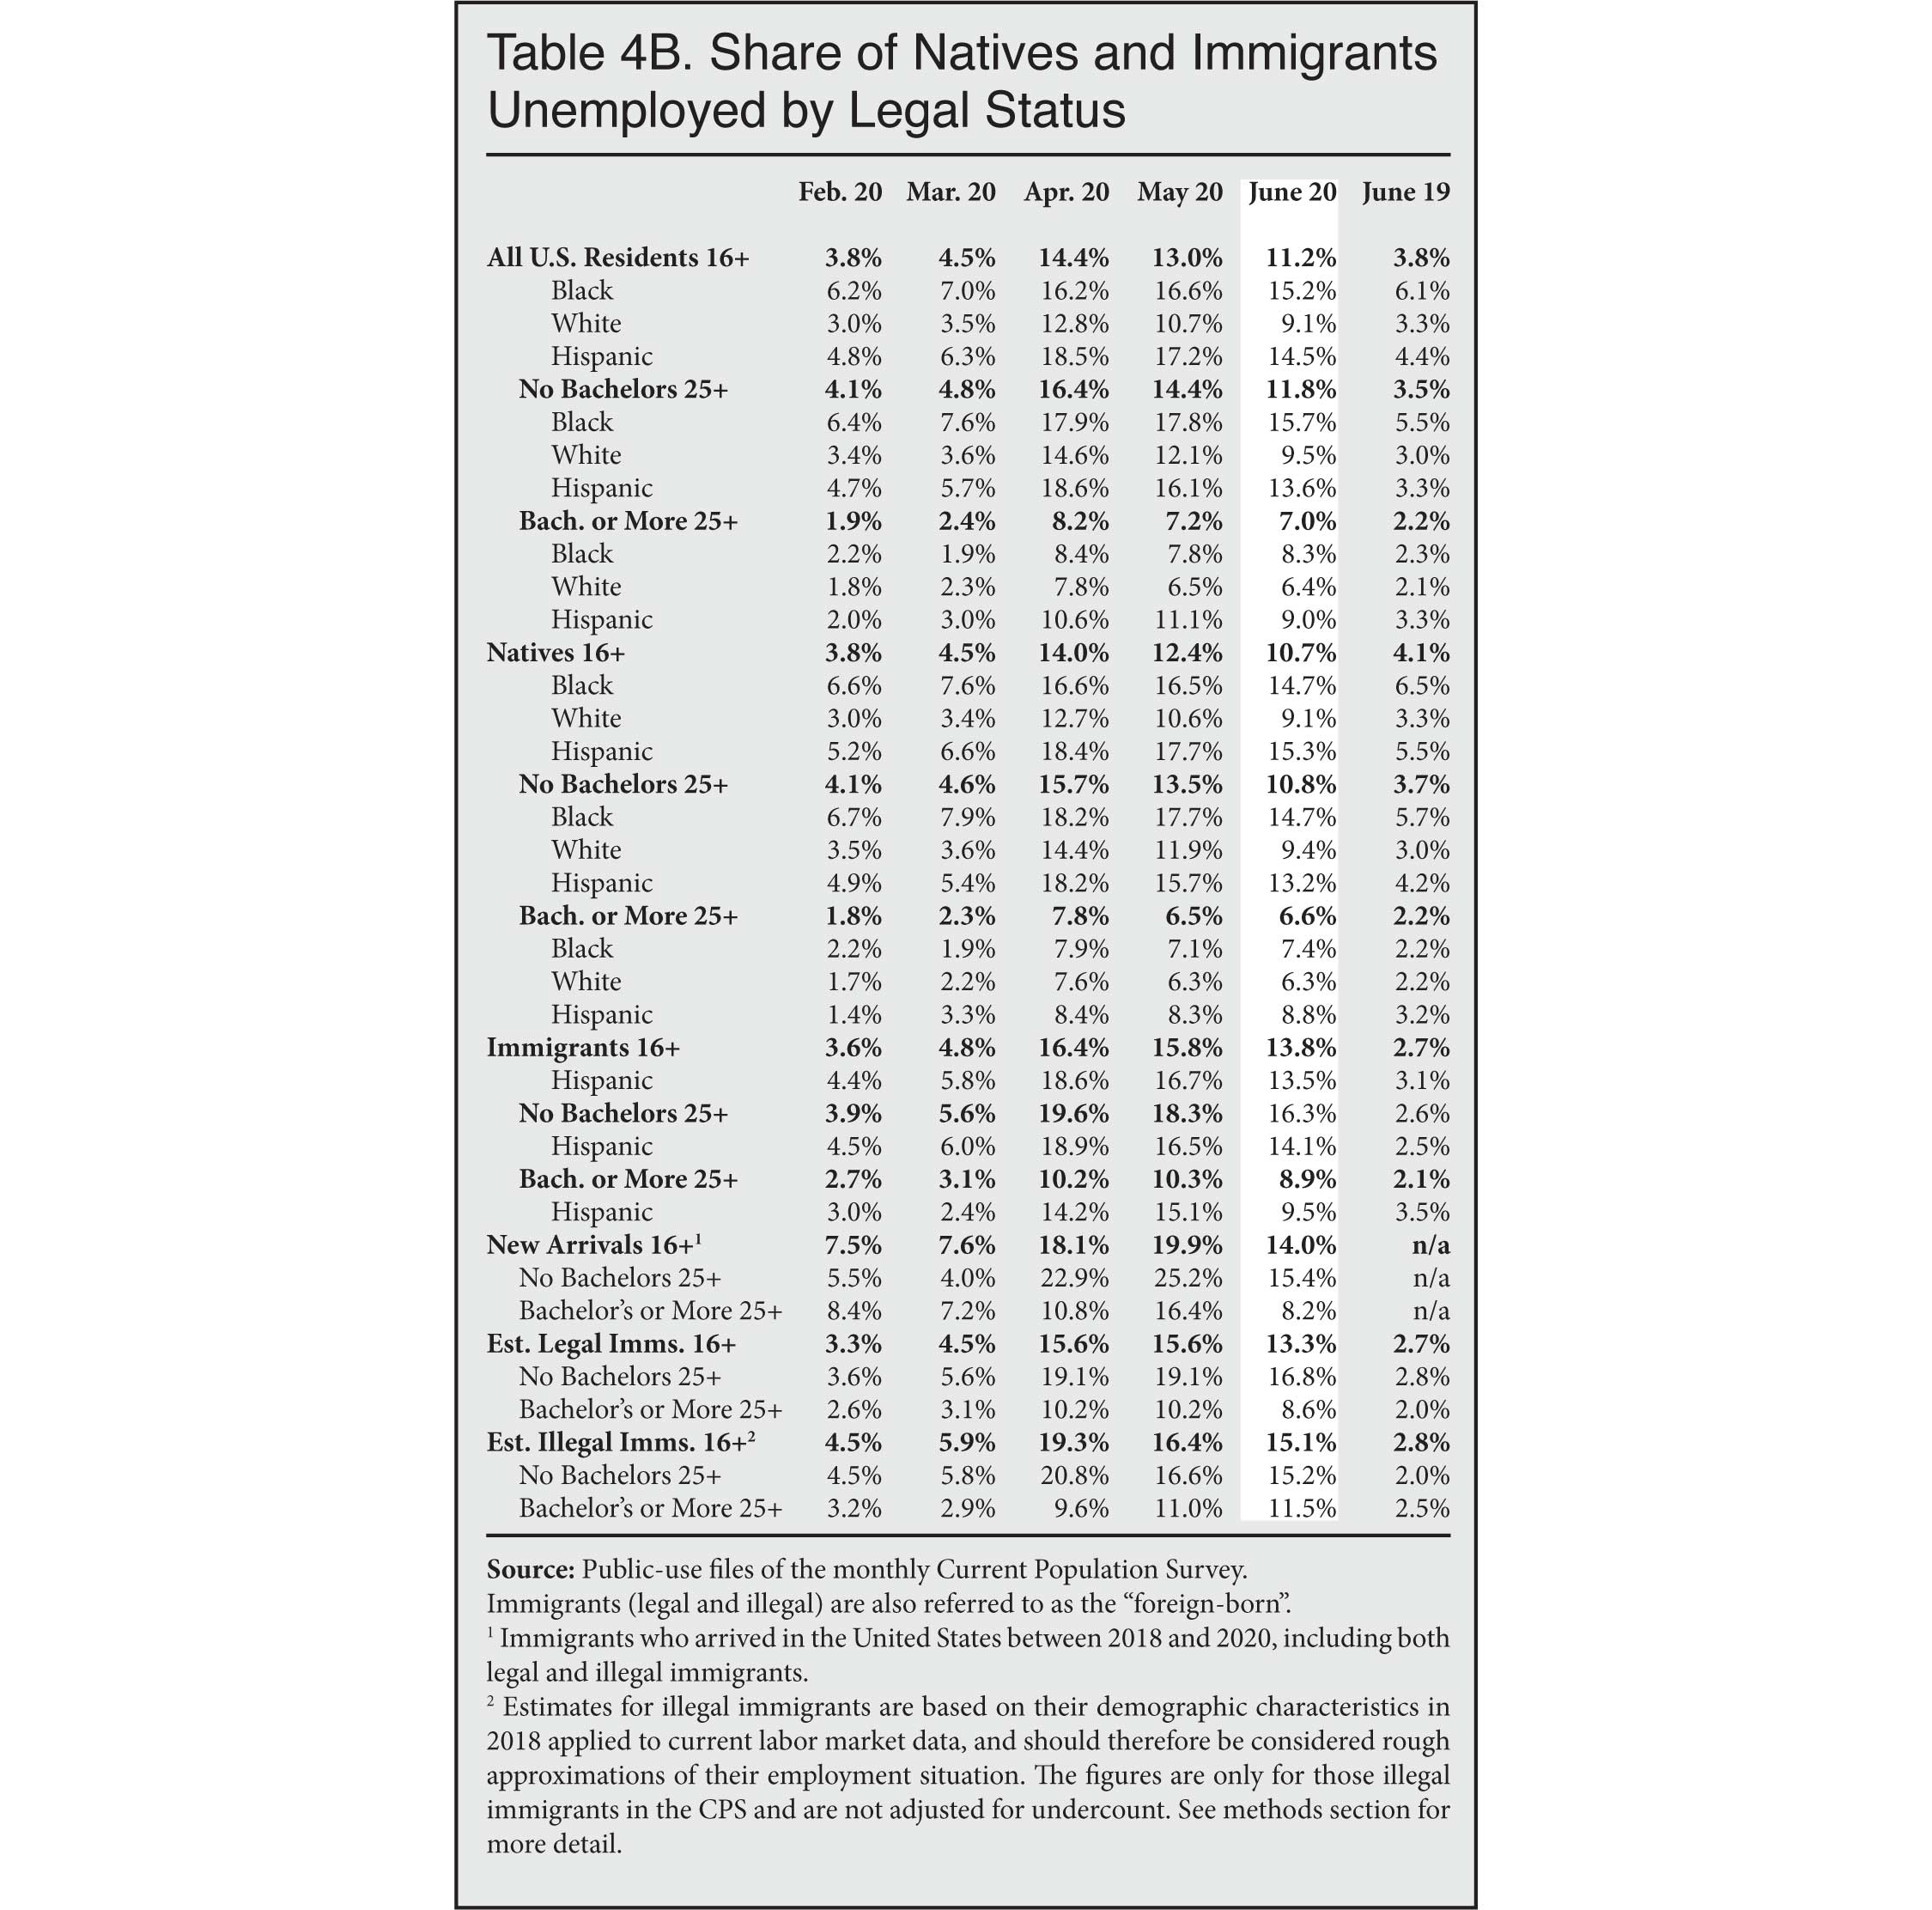 Graph: Share of Natives and Immigrants Unemployed by Legal Status